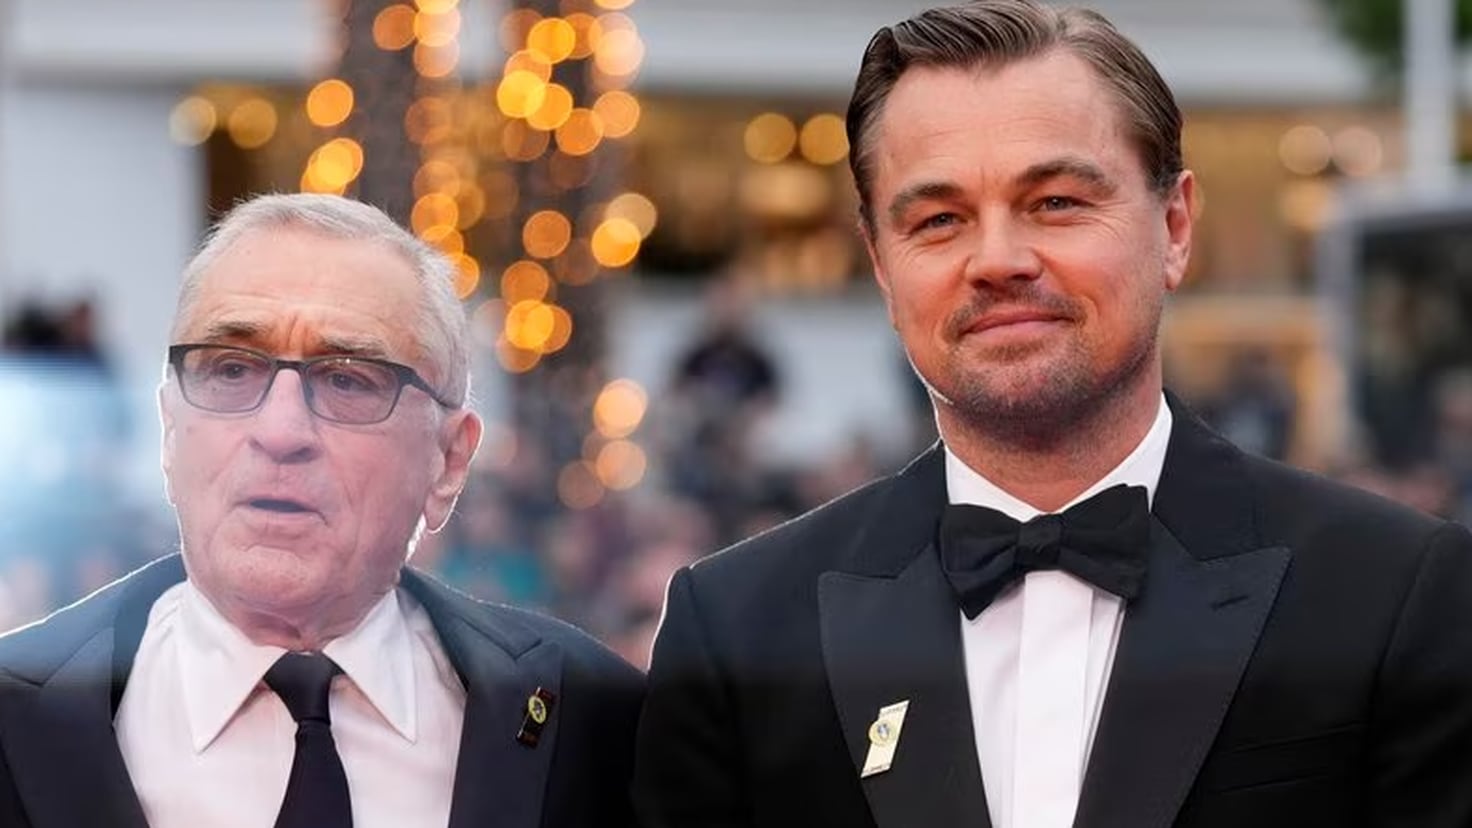 In which films do De Niro and Leonardo DiCaprio appear together?
